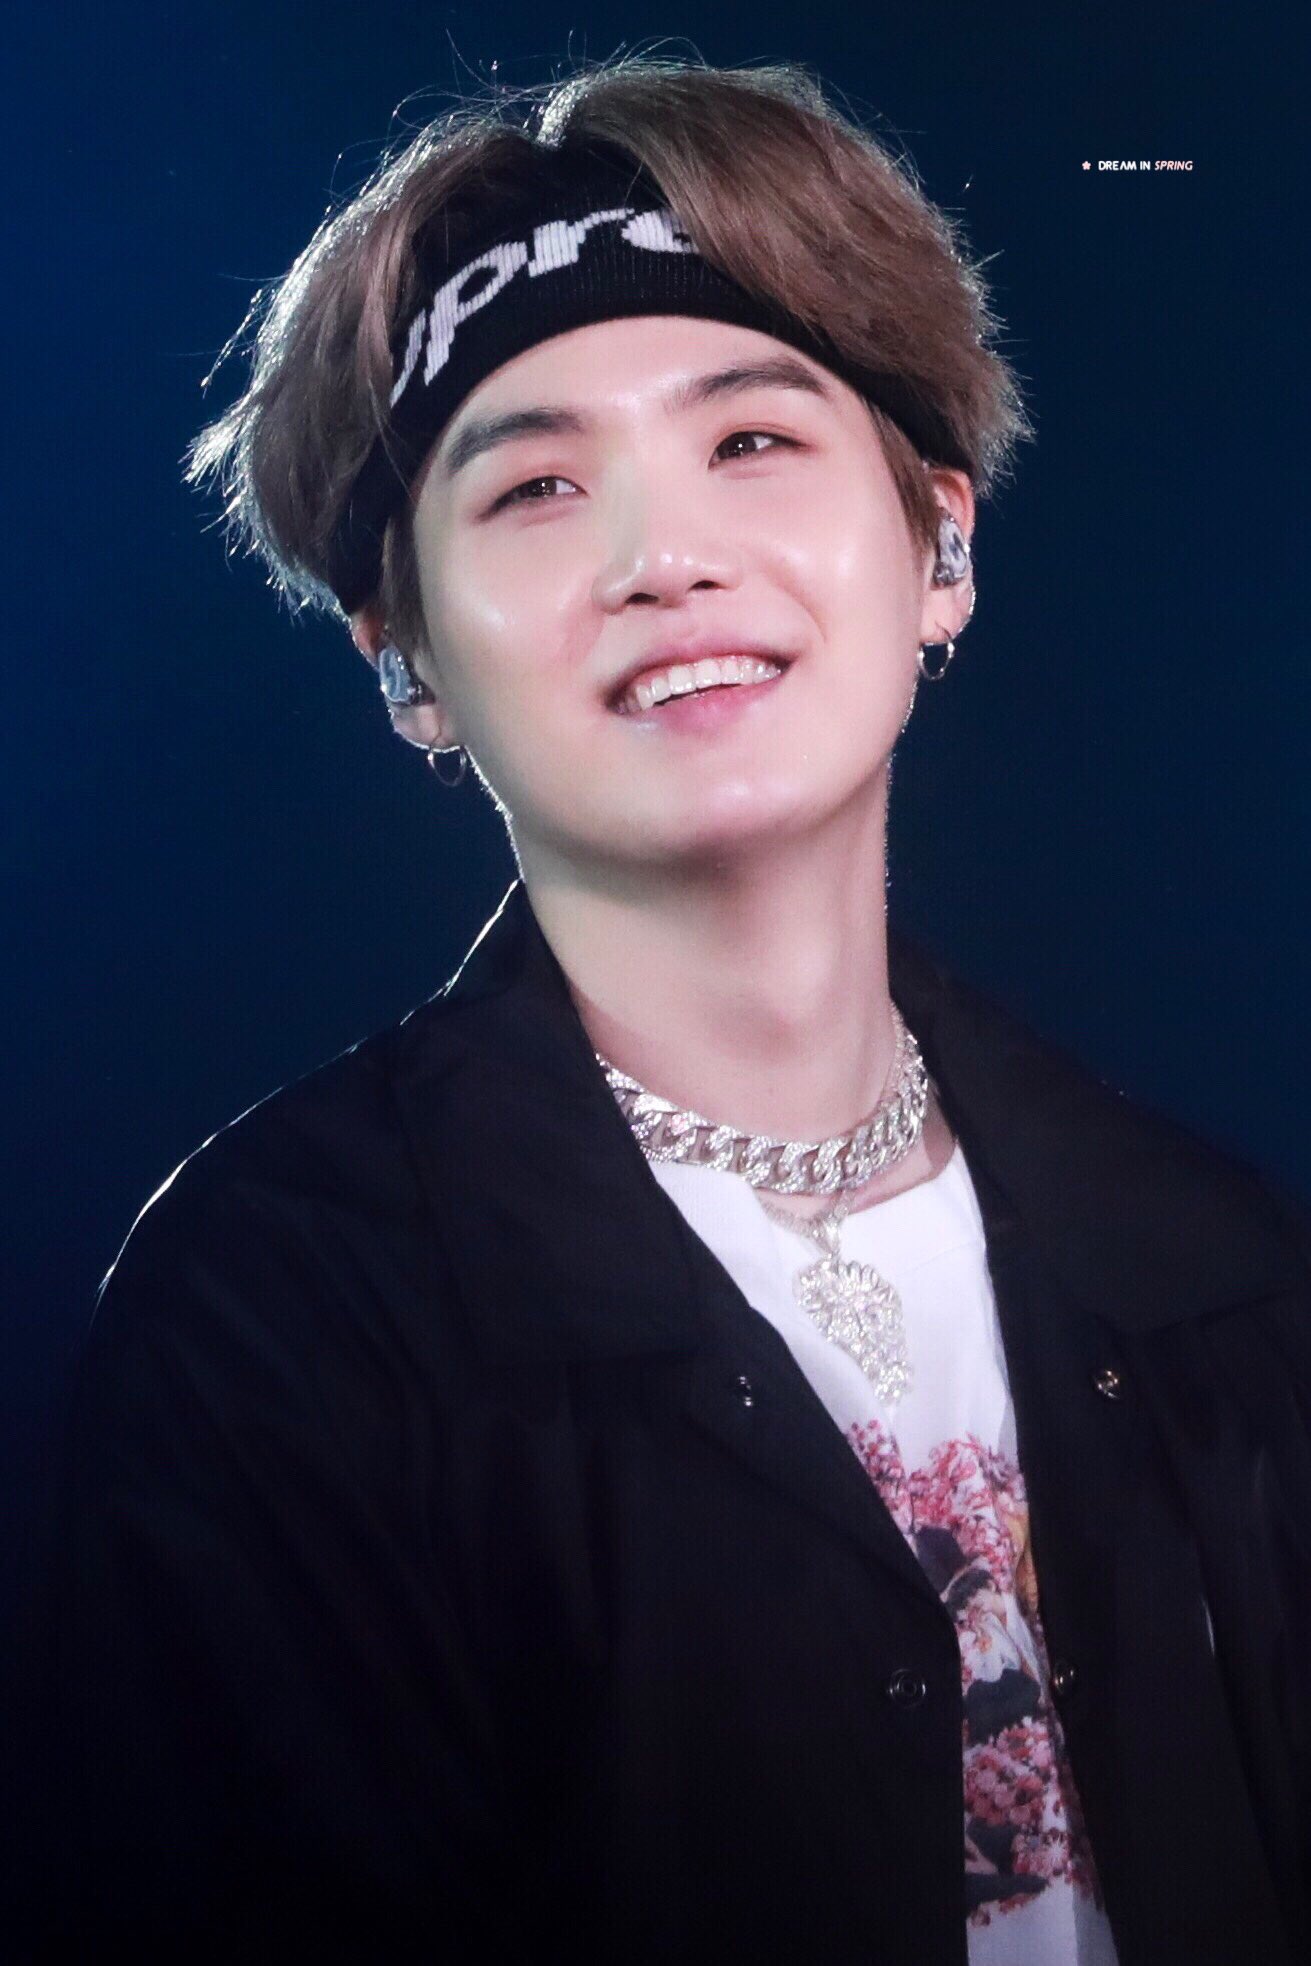 Here Are 10+ Photos Of BTS’s Suga Dazzling You With His Adorable Smile ...